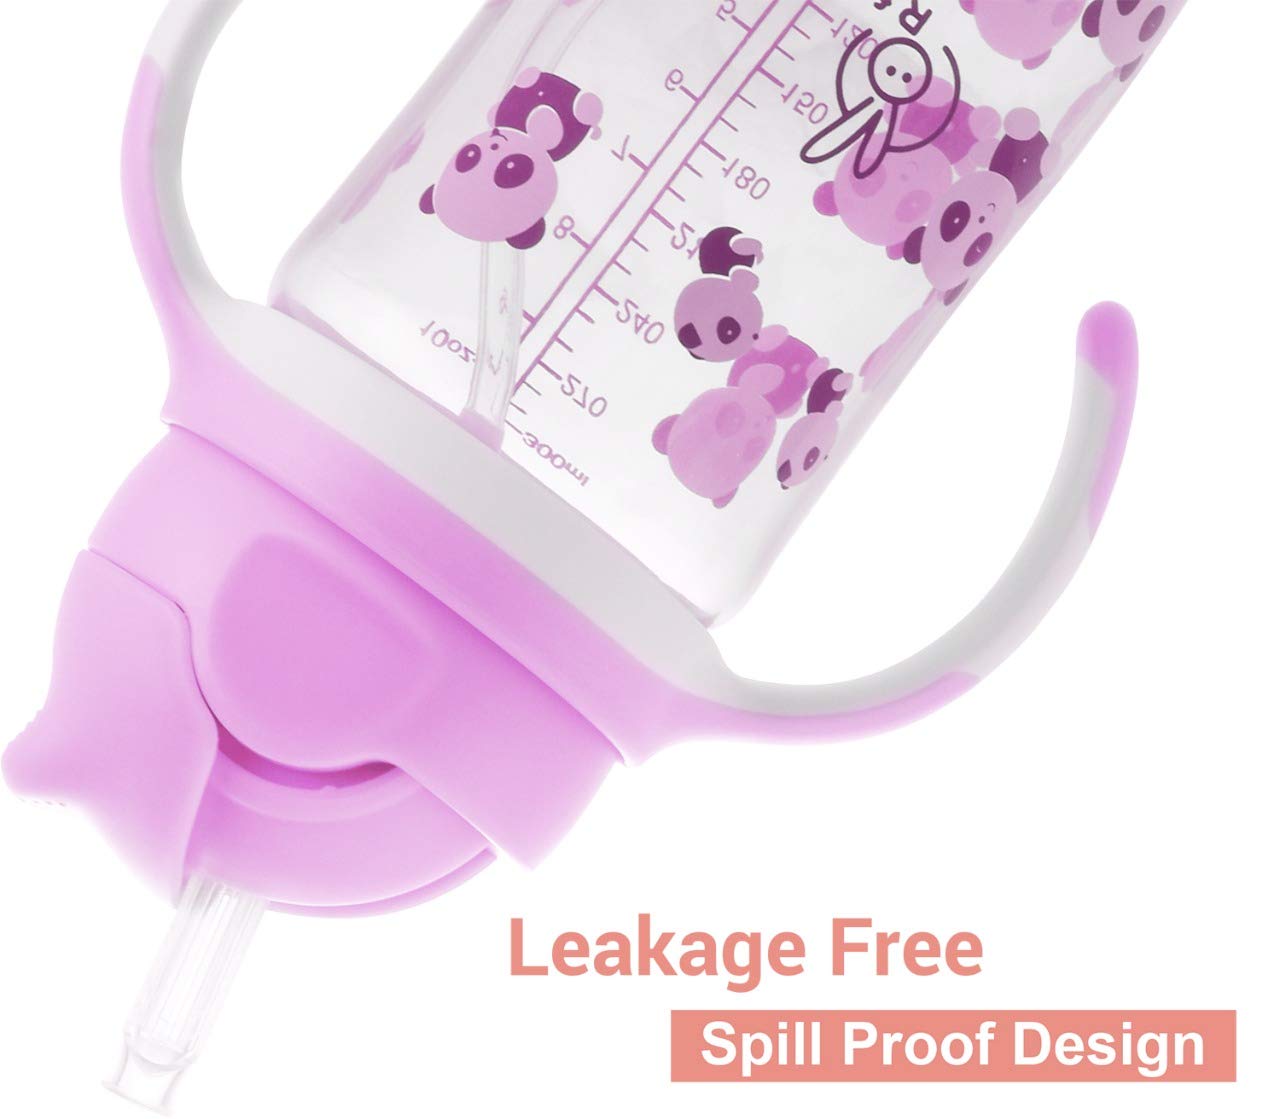 R FOR RABBIT Spill Free Bubble Sipper With Twin Handle For Babies - Pink -300ml, 9m+